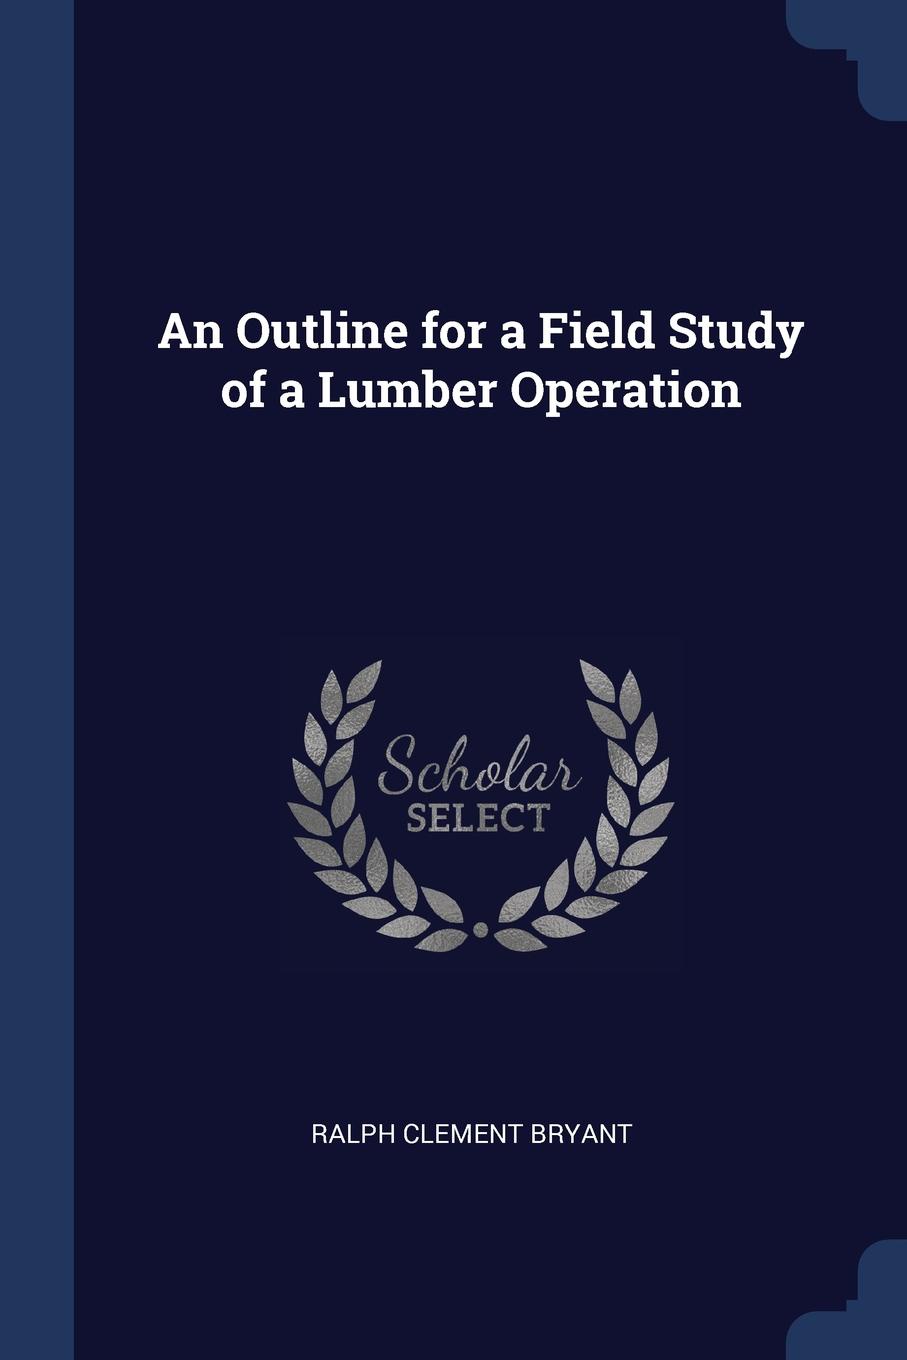 An Outline for a Field Study of a Lumber Operation